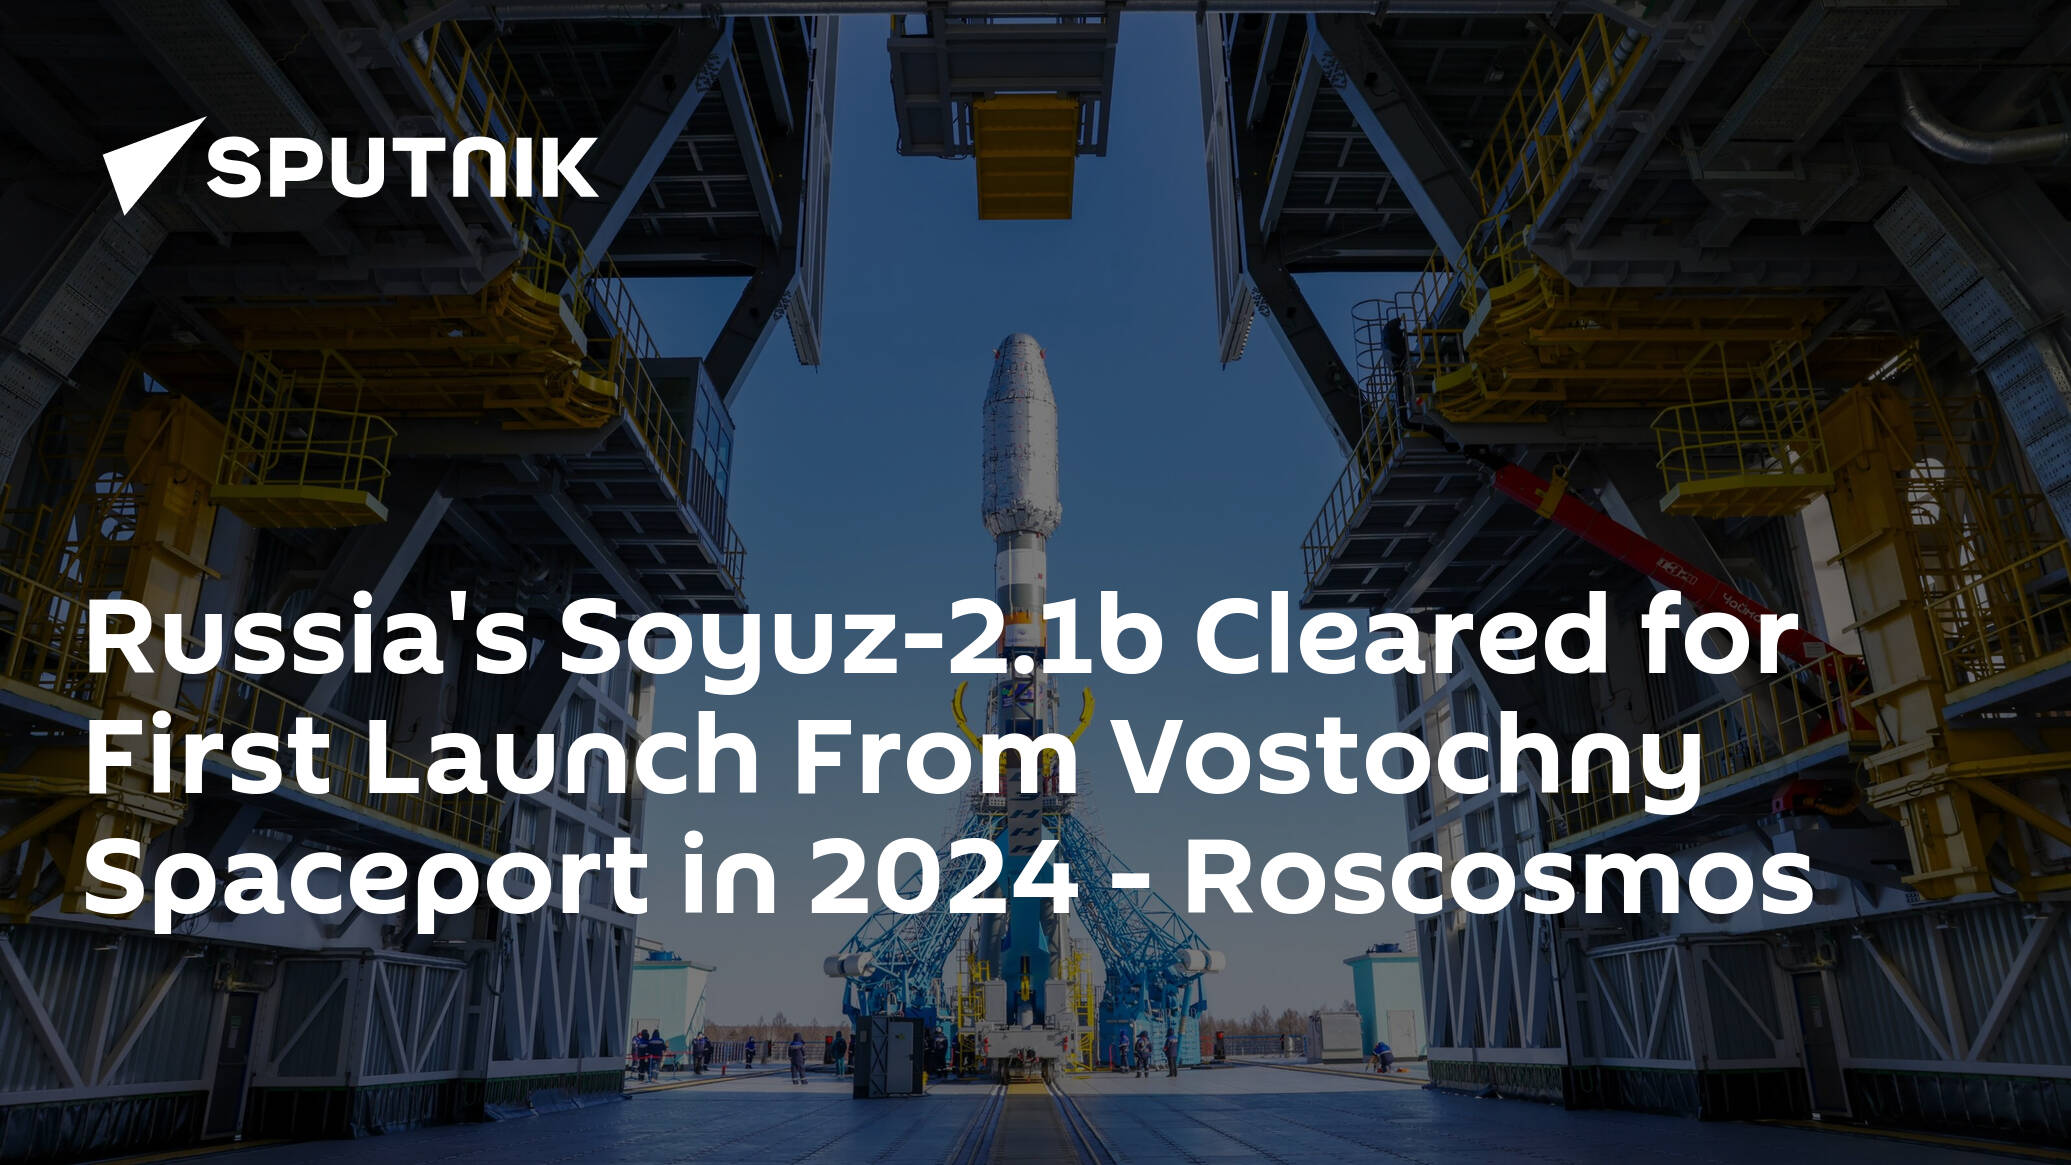 Russia's Soyuz-2.1b Cleared for First Launch From Vostochny Spaceport in 2024 – Roscosmos